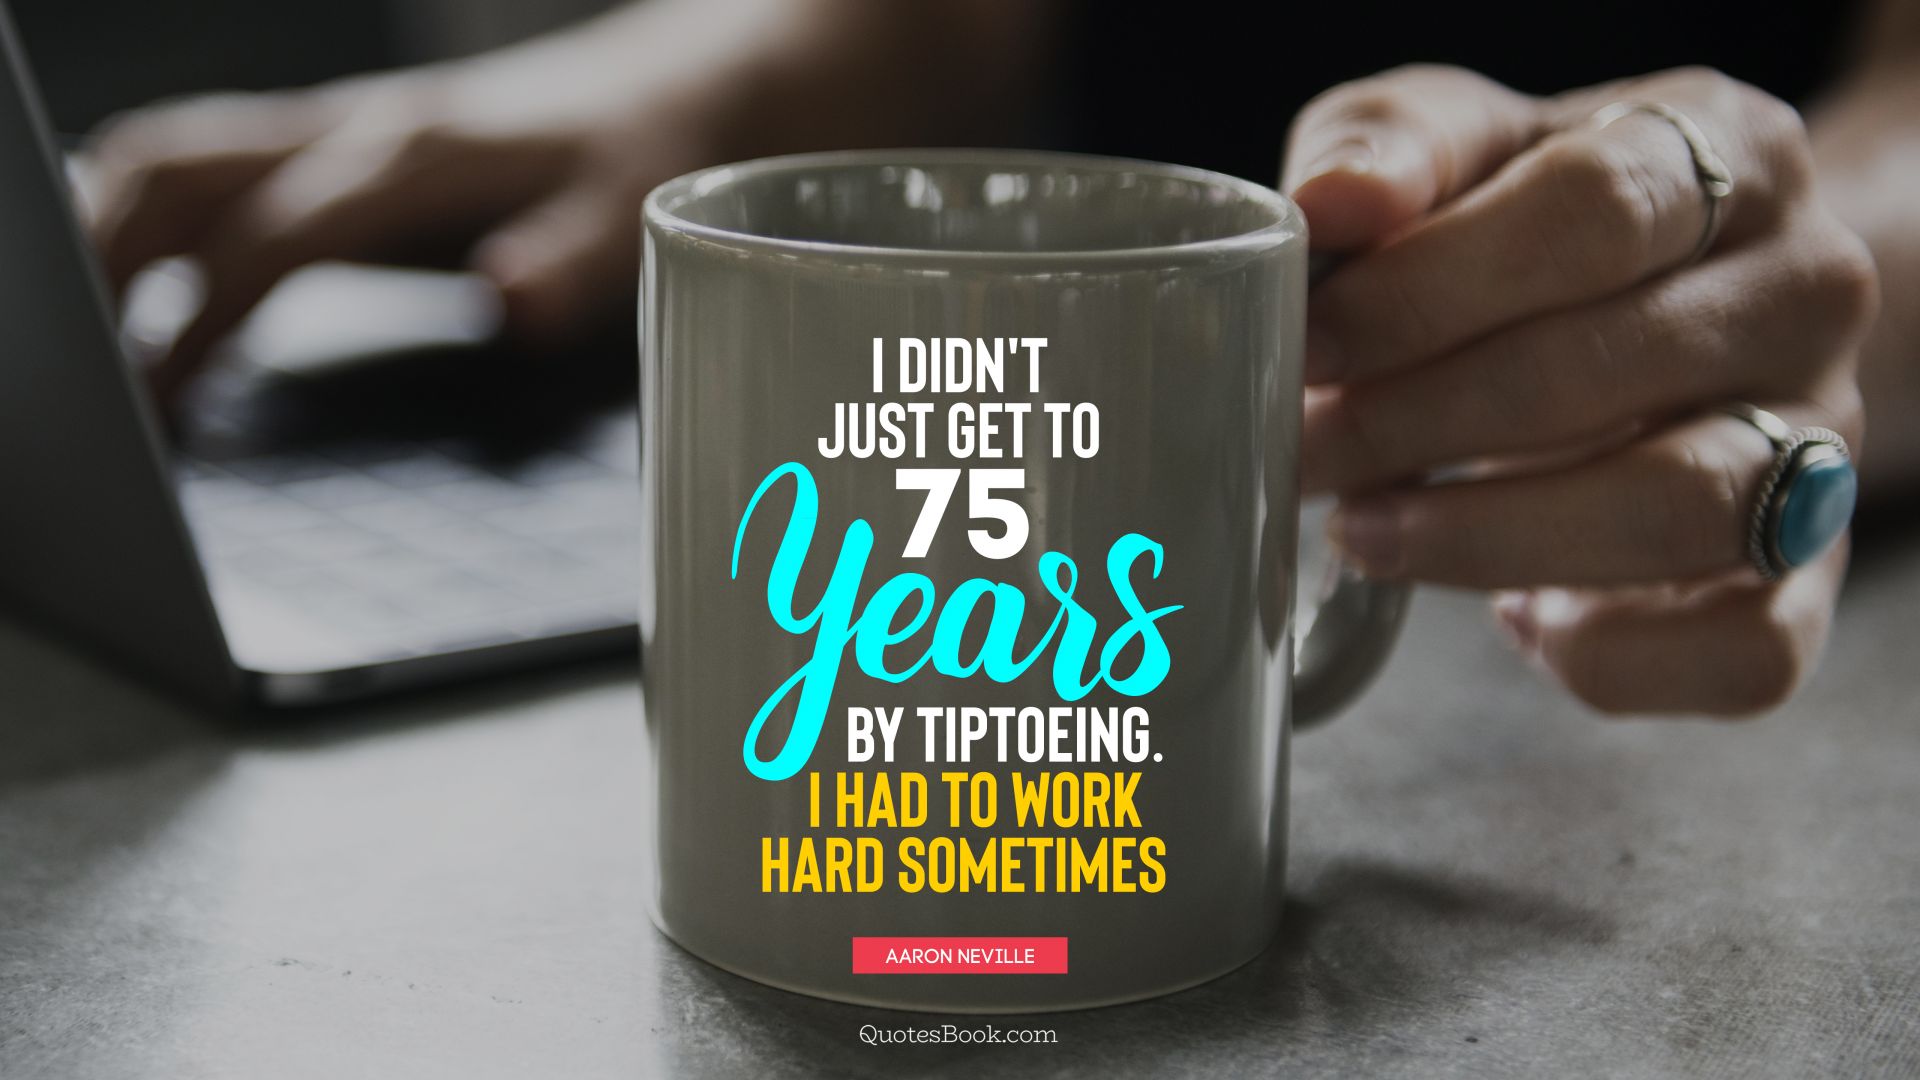 I didn't just get to 75 years by tiptoeing. I had to work hard sometimes. - Quote by Aaron Neville